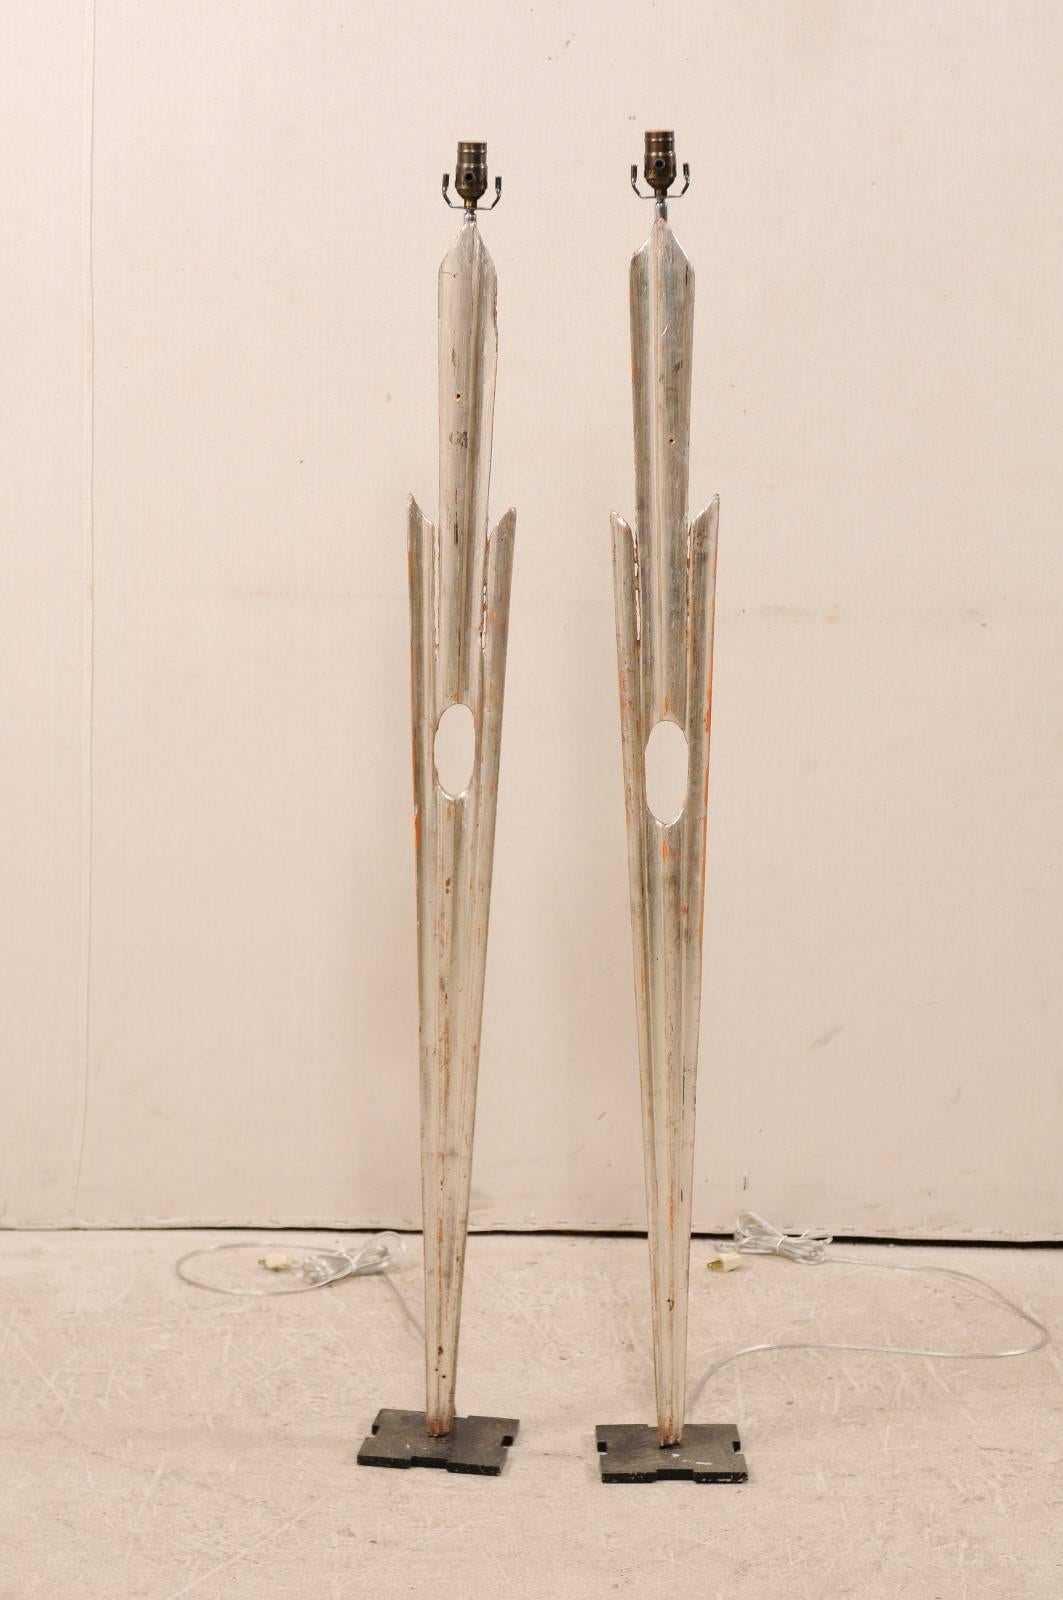 A pair of floor lamps made from Italian, 19th century rays. This pair of tall and slender Italian ray floor lamps have been fashioned out of old silvered star-burst rays and set onto newer, custom black metal bases. The center of the rays have a